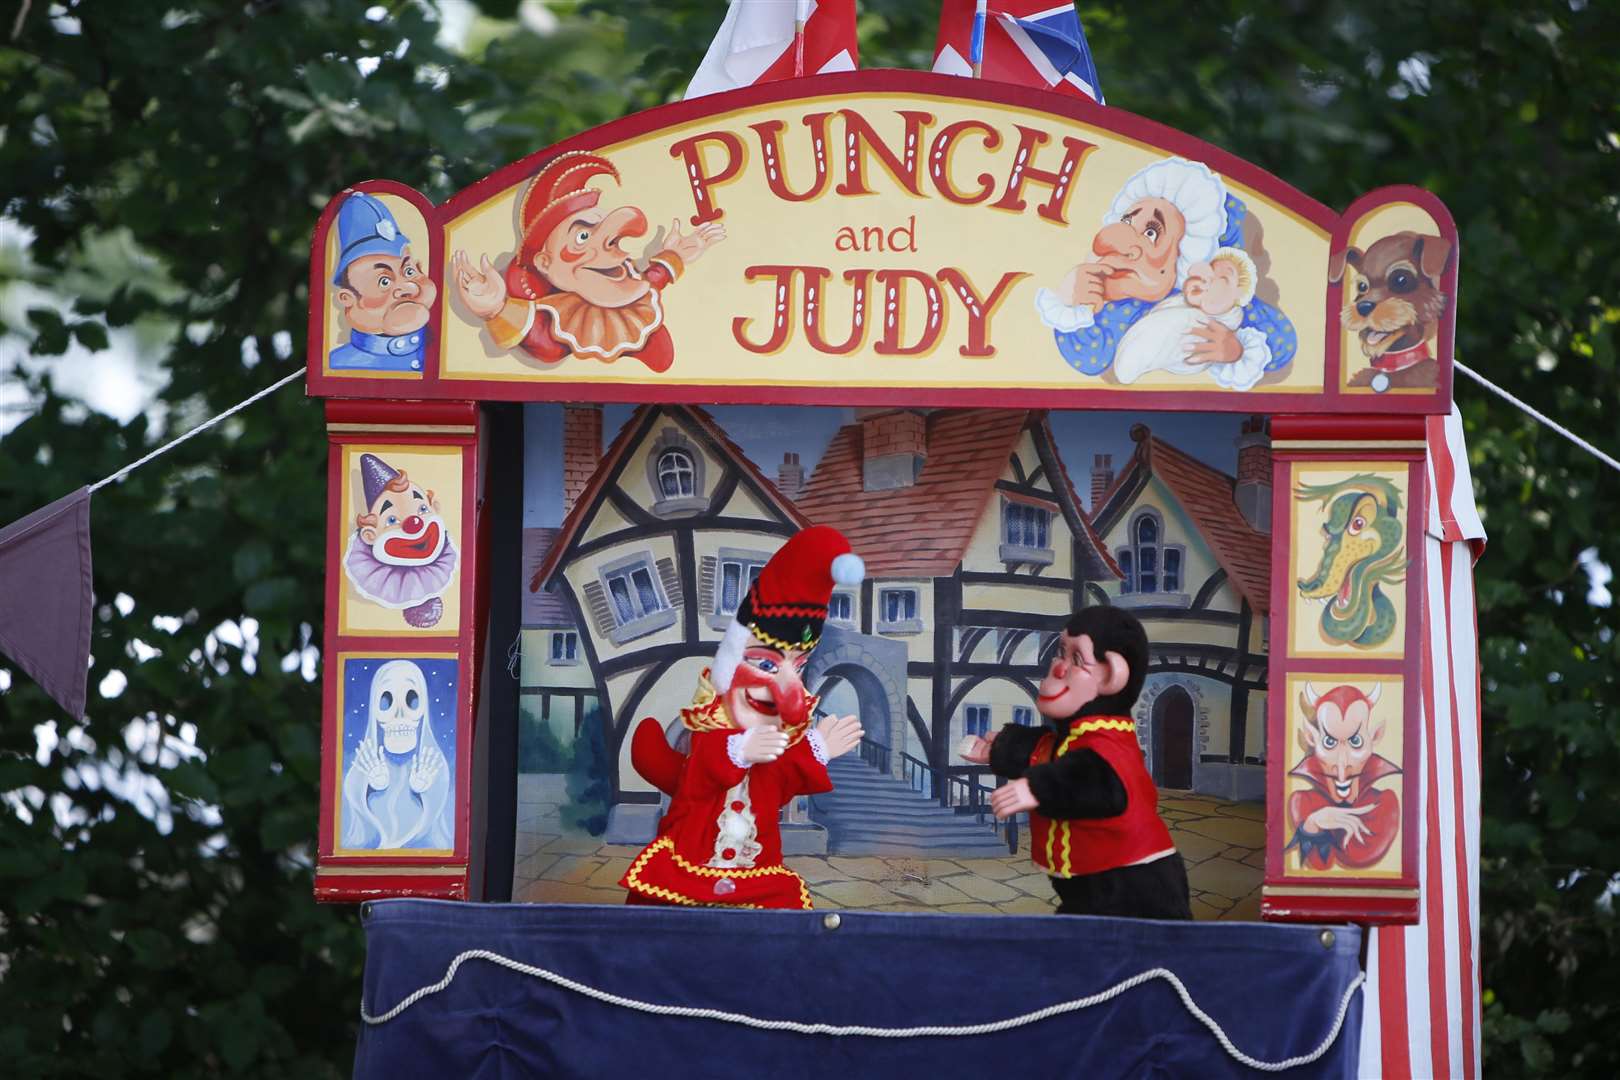 The ever popular Punch and Judy Show